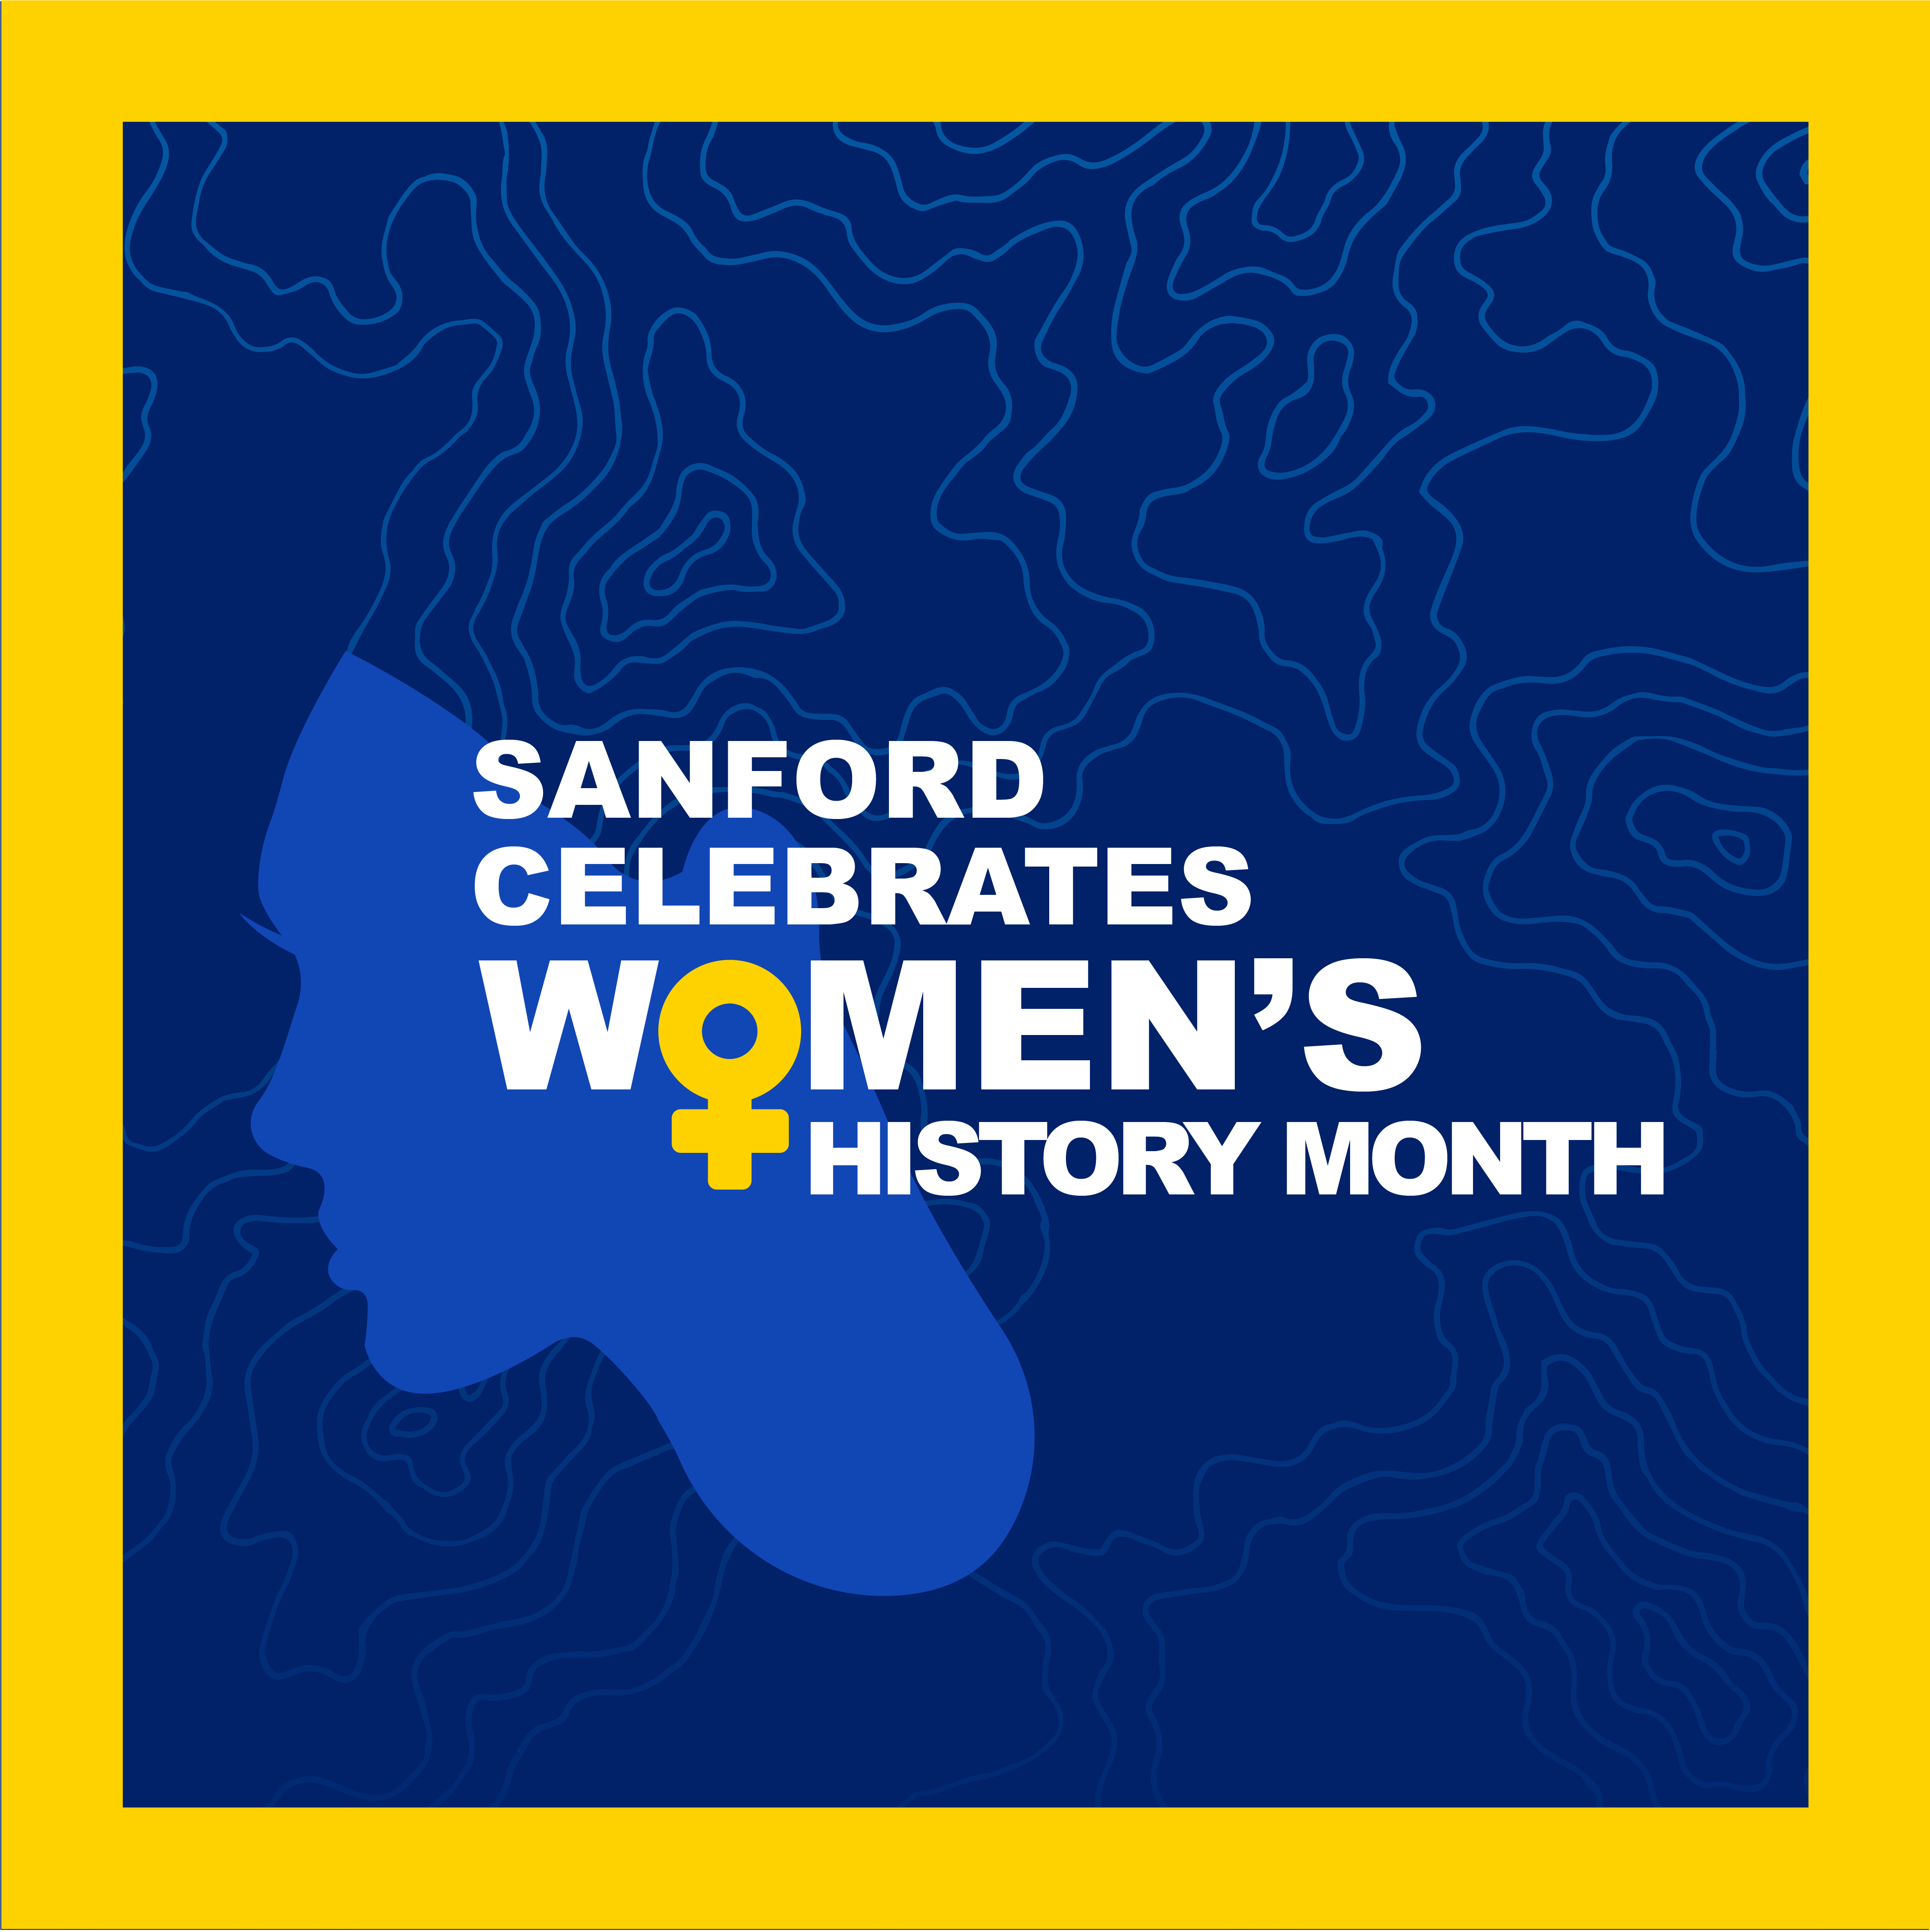 Celebrating Women's History Month In School Benefits All Learners